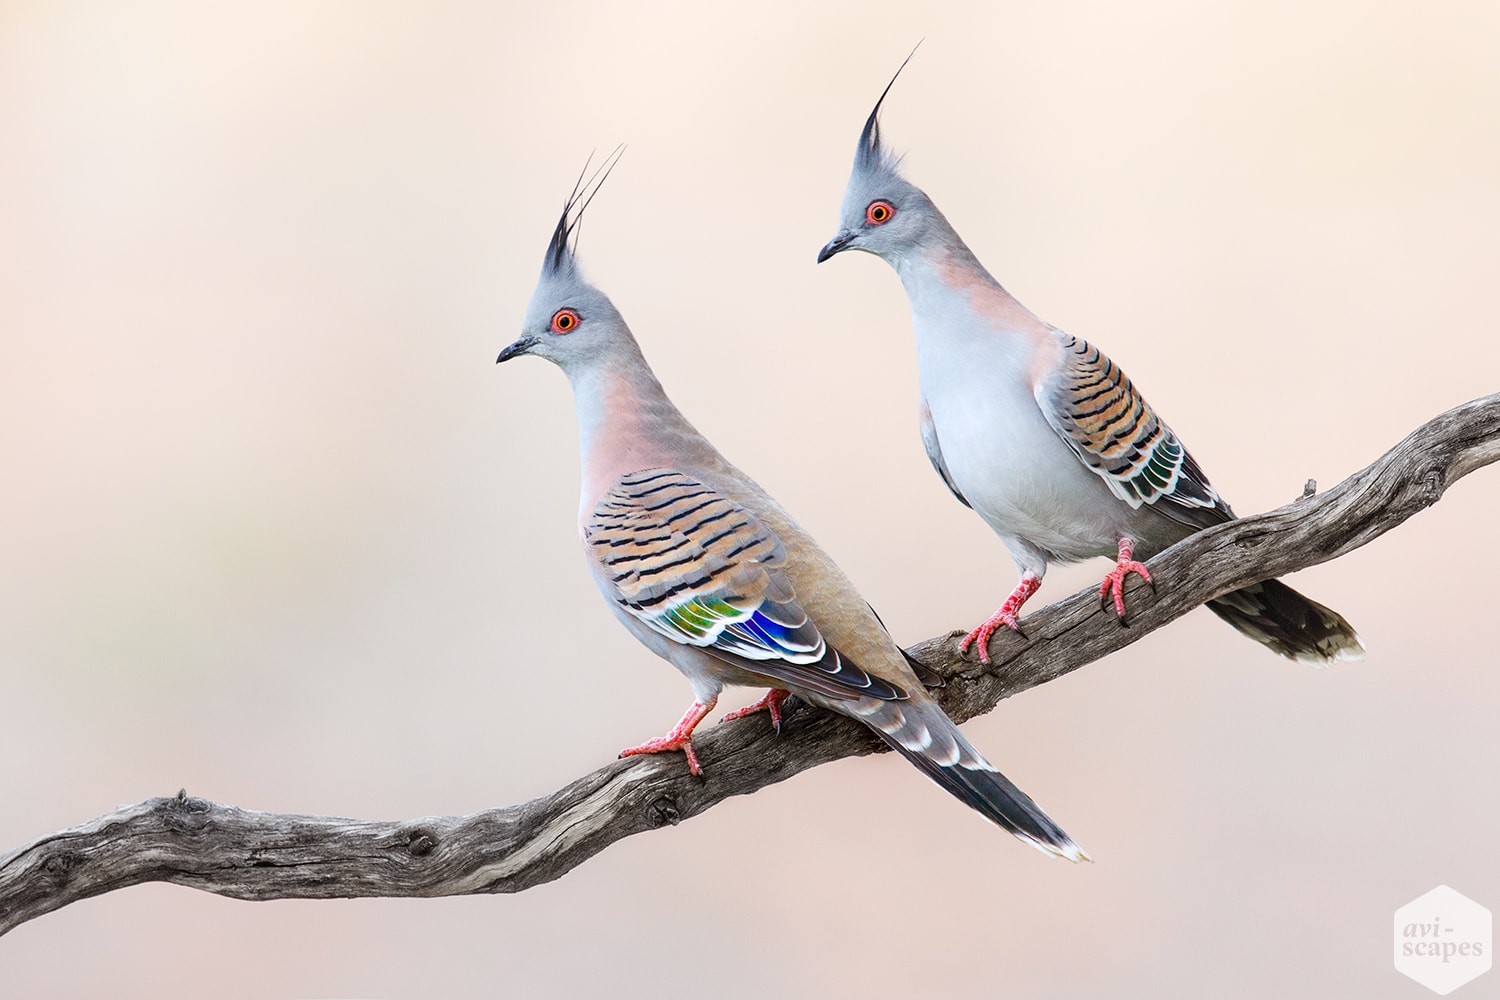 Crested Pigeon - The Australian Museum